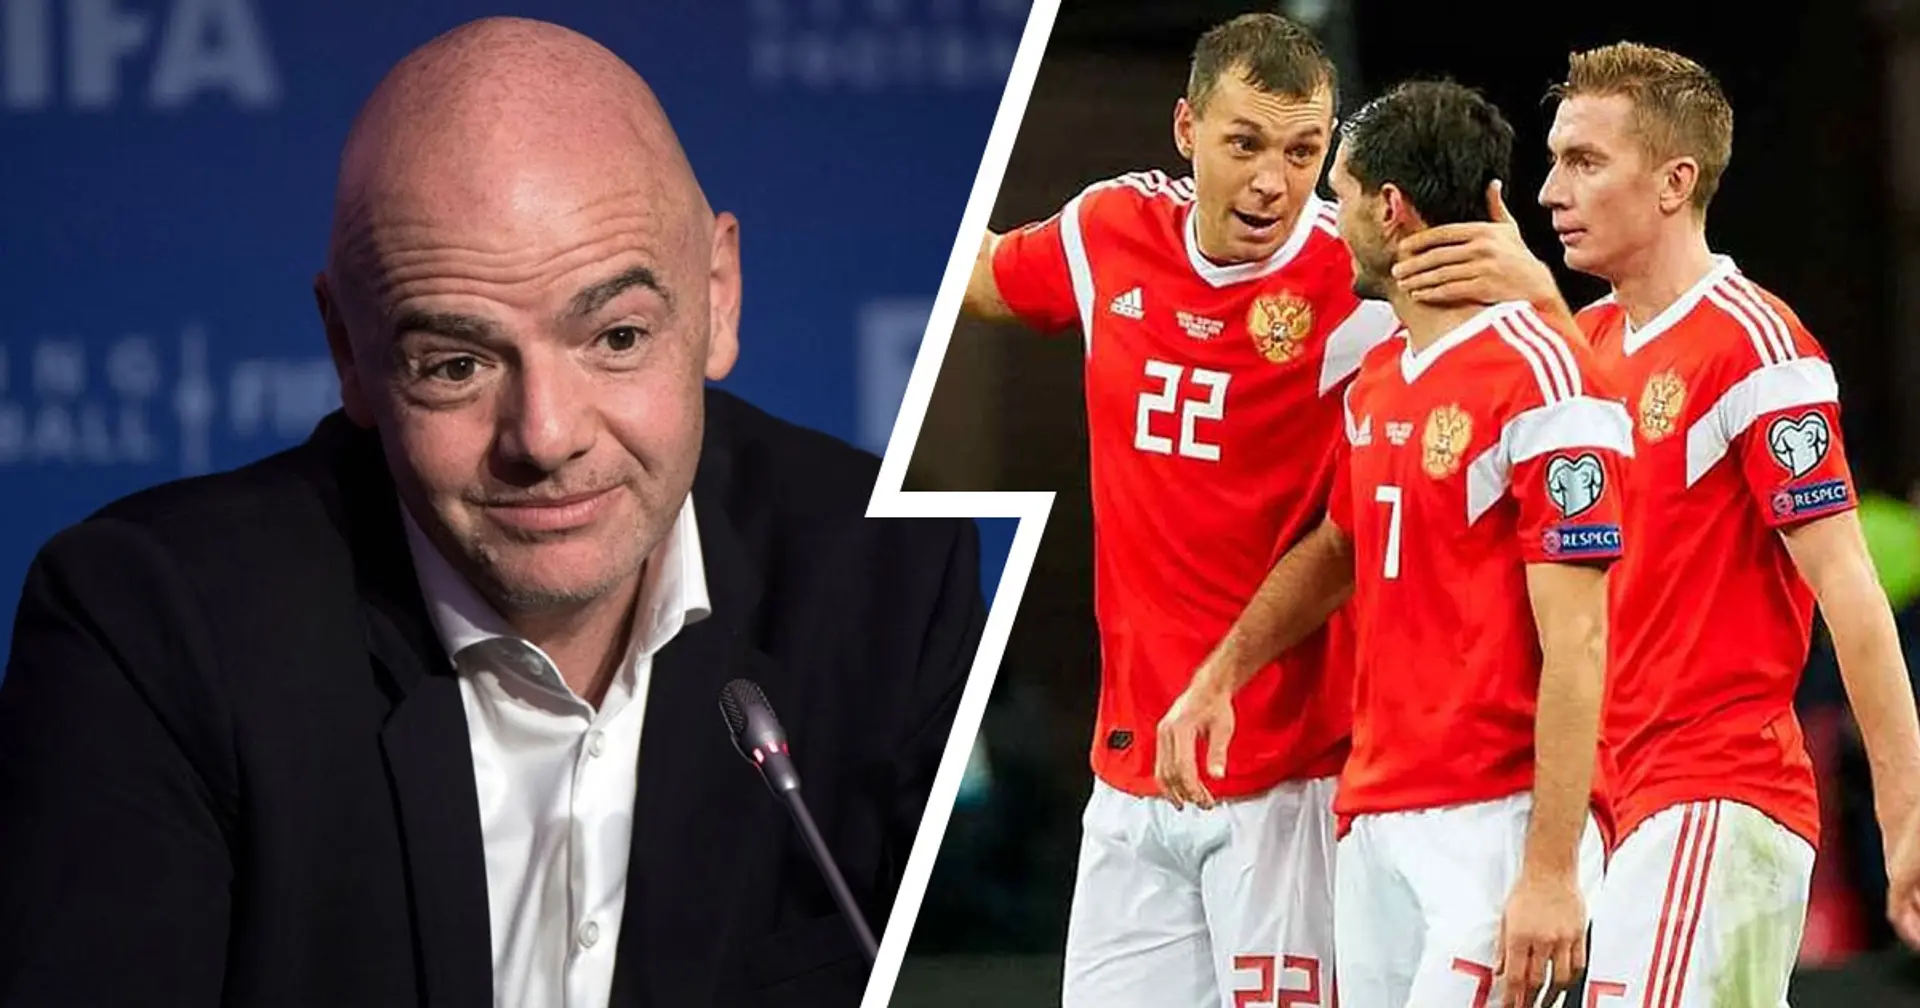 Poland, Sweden and Czech Republic react to FIFA placing sanctions on Russia